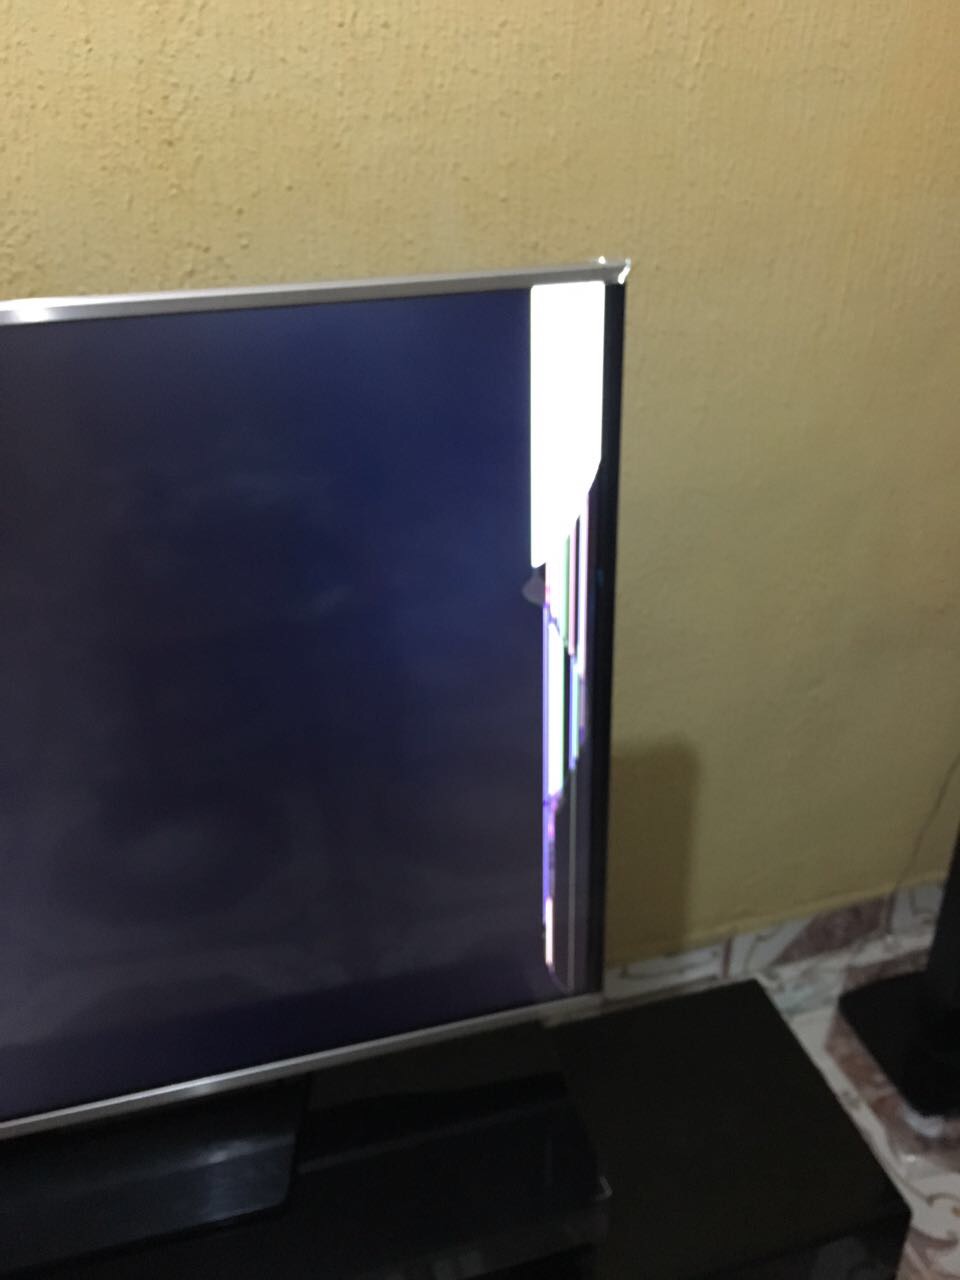 Is Cracked Screen Of TV Repairable? - Technology Market (2) - Nigeria